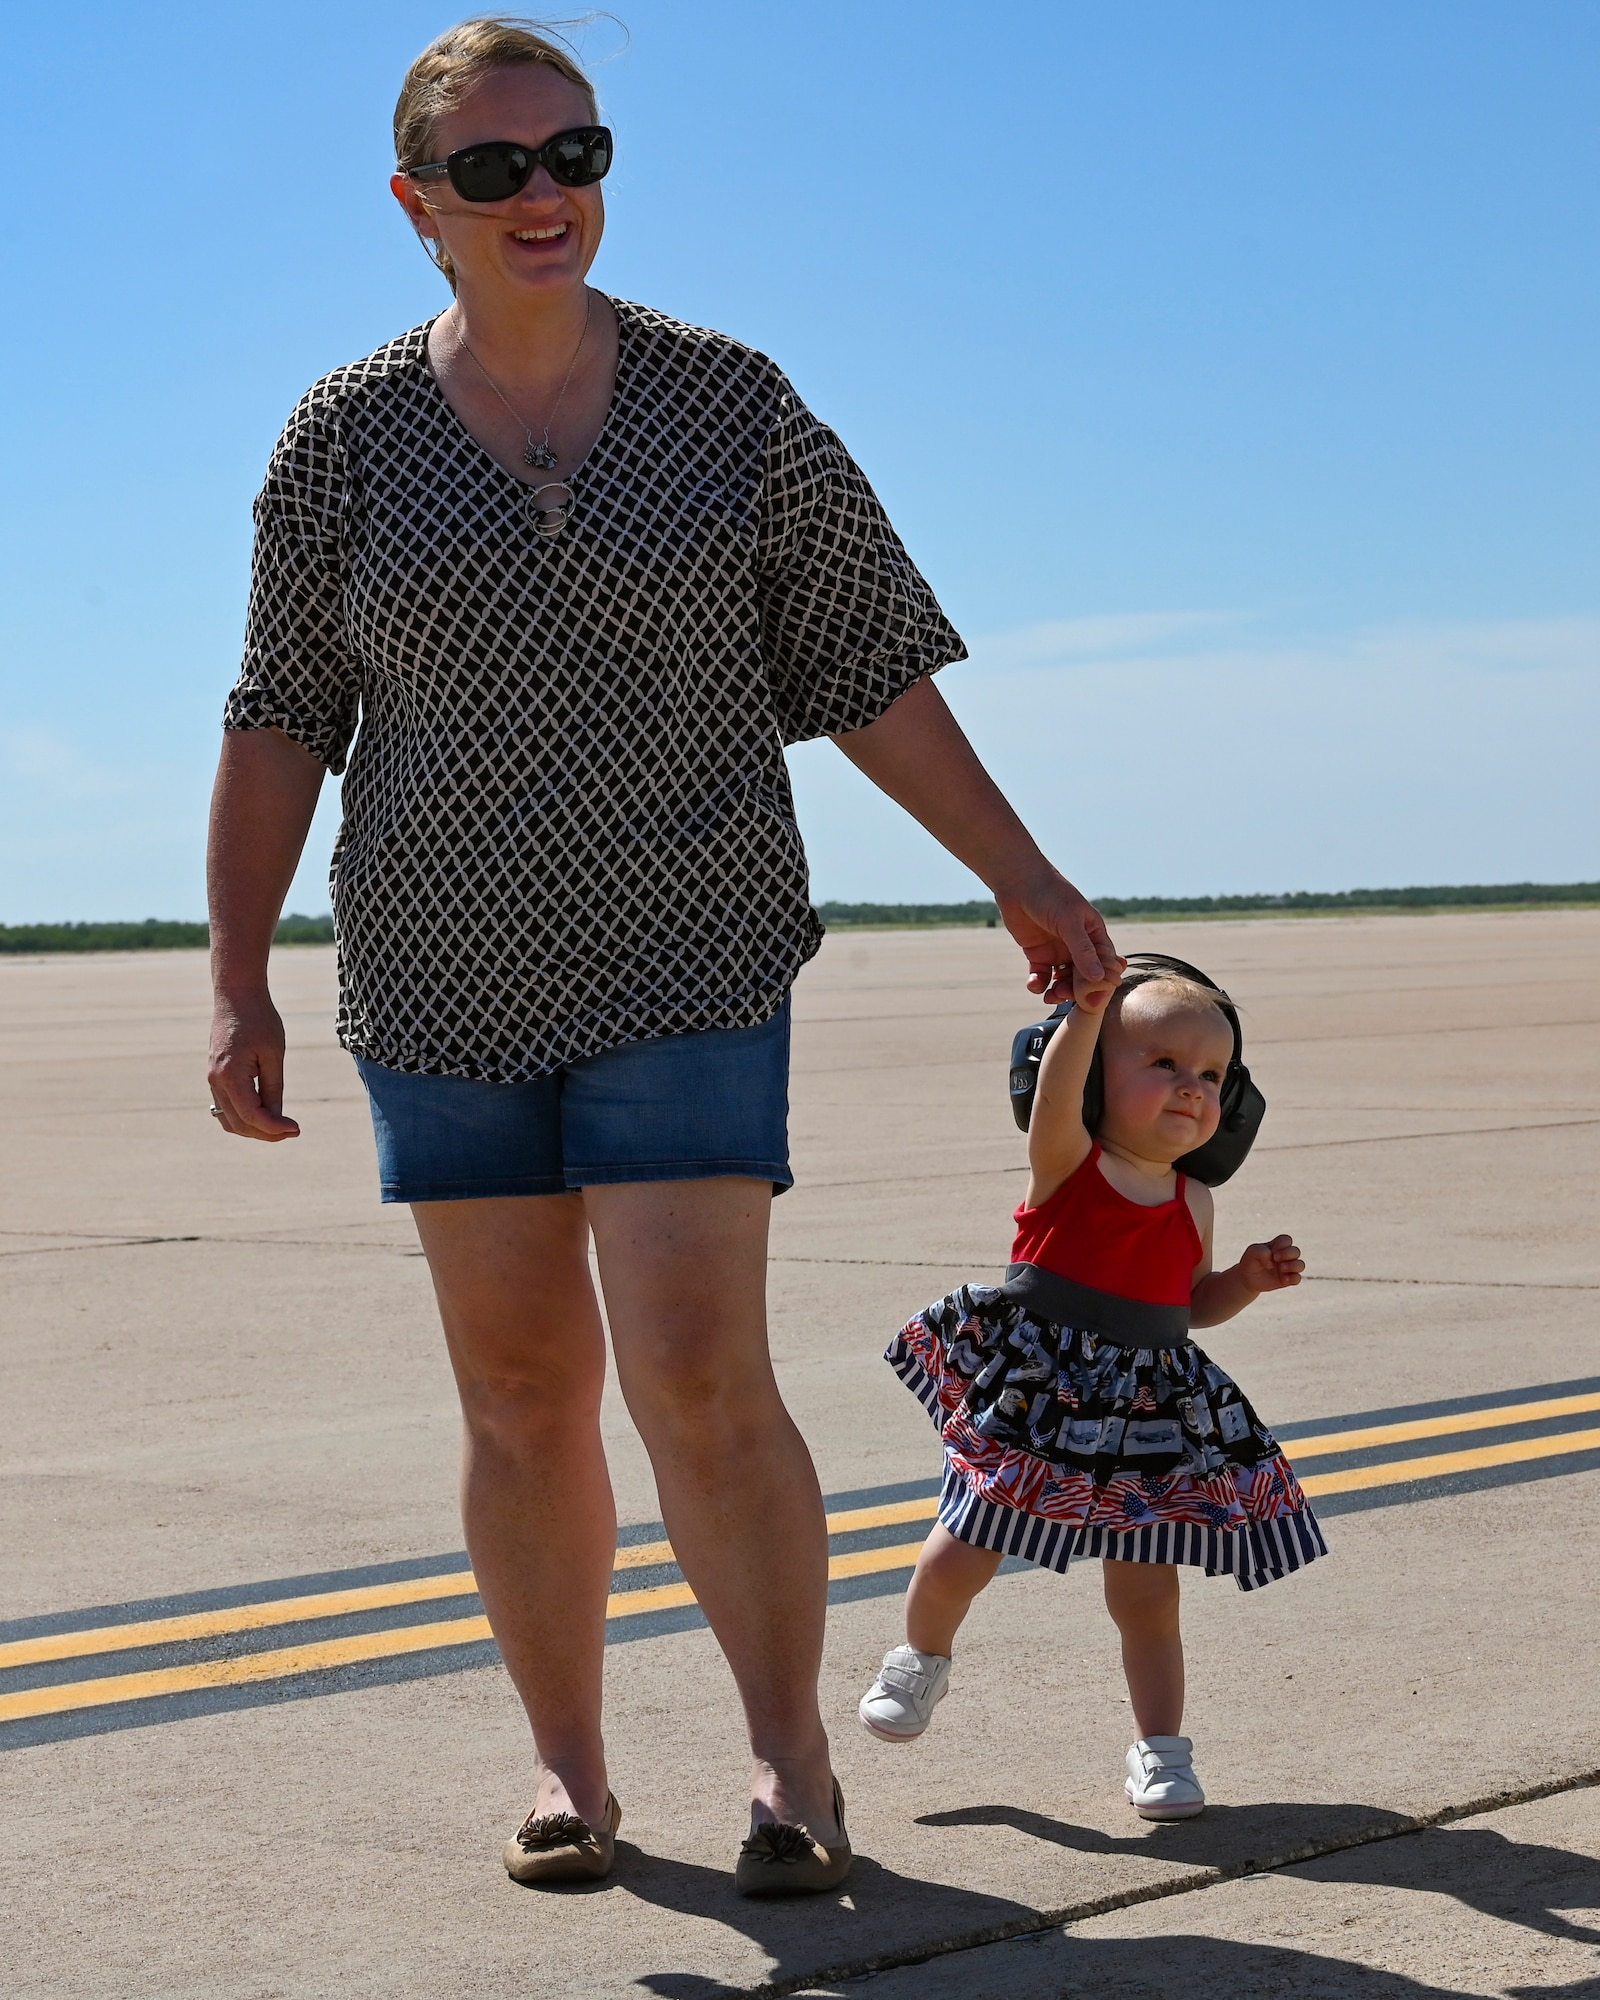 Kathleen and Hannah Kippie, wife and daughter of Col. Kevin Kippie, 7th Bomb Wing vice commander, walk on the flightline at Dyess Air Force Base, Texas, June 29, 2023. Kippie served at Dyess from June 11, 2021, to June 16, 2023. While at Dyess, Kippie was committed to excellence as he fostered financial innovation and proposals for the installation, created a Wing Welcome Center for new Airmen and worked in integrated teams to action the wing’s fiscal efforts. (U.S. Air Force photo by Airman 1st Class Emma Anderson)